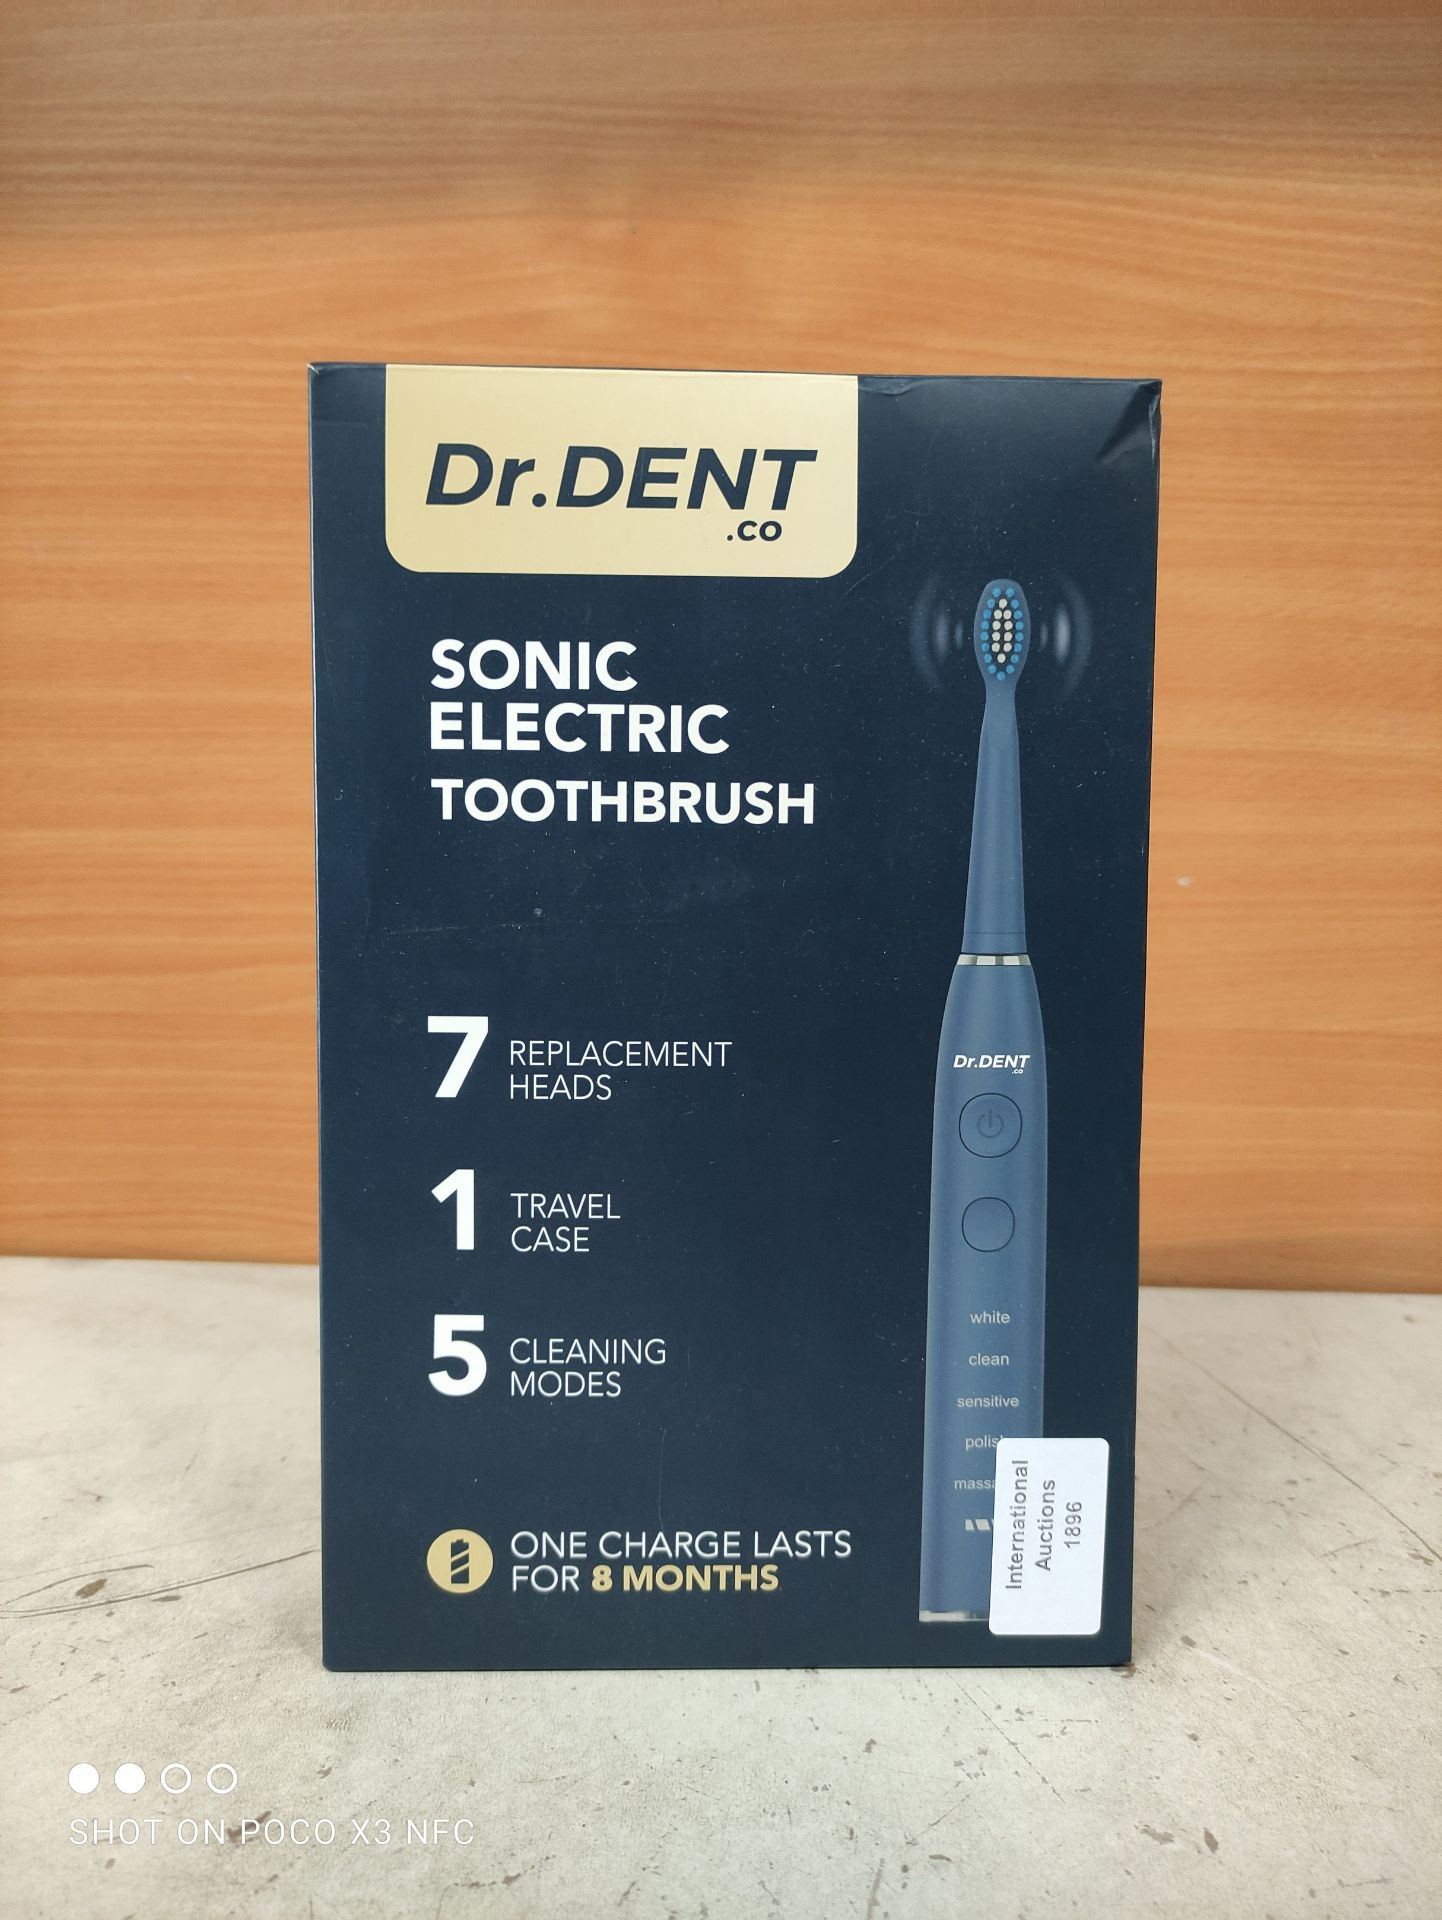 RRP £25.99 DrDent Premium Sonic Electric Toothbrush - Image 2 of 2